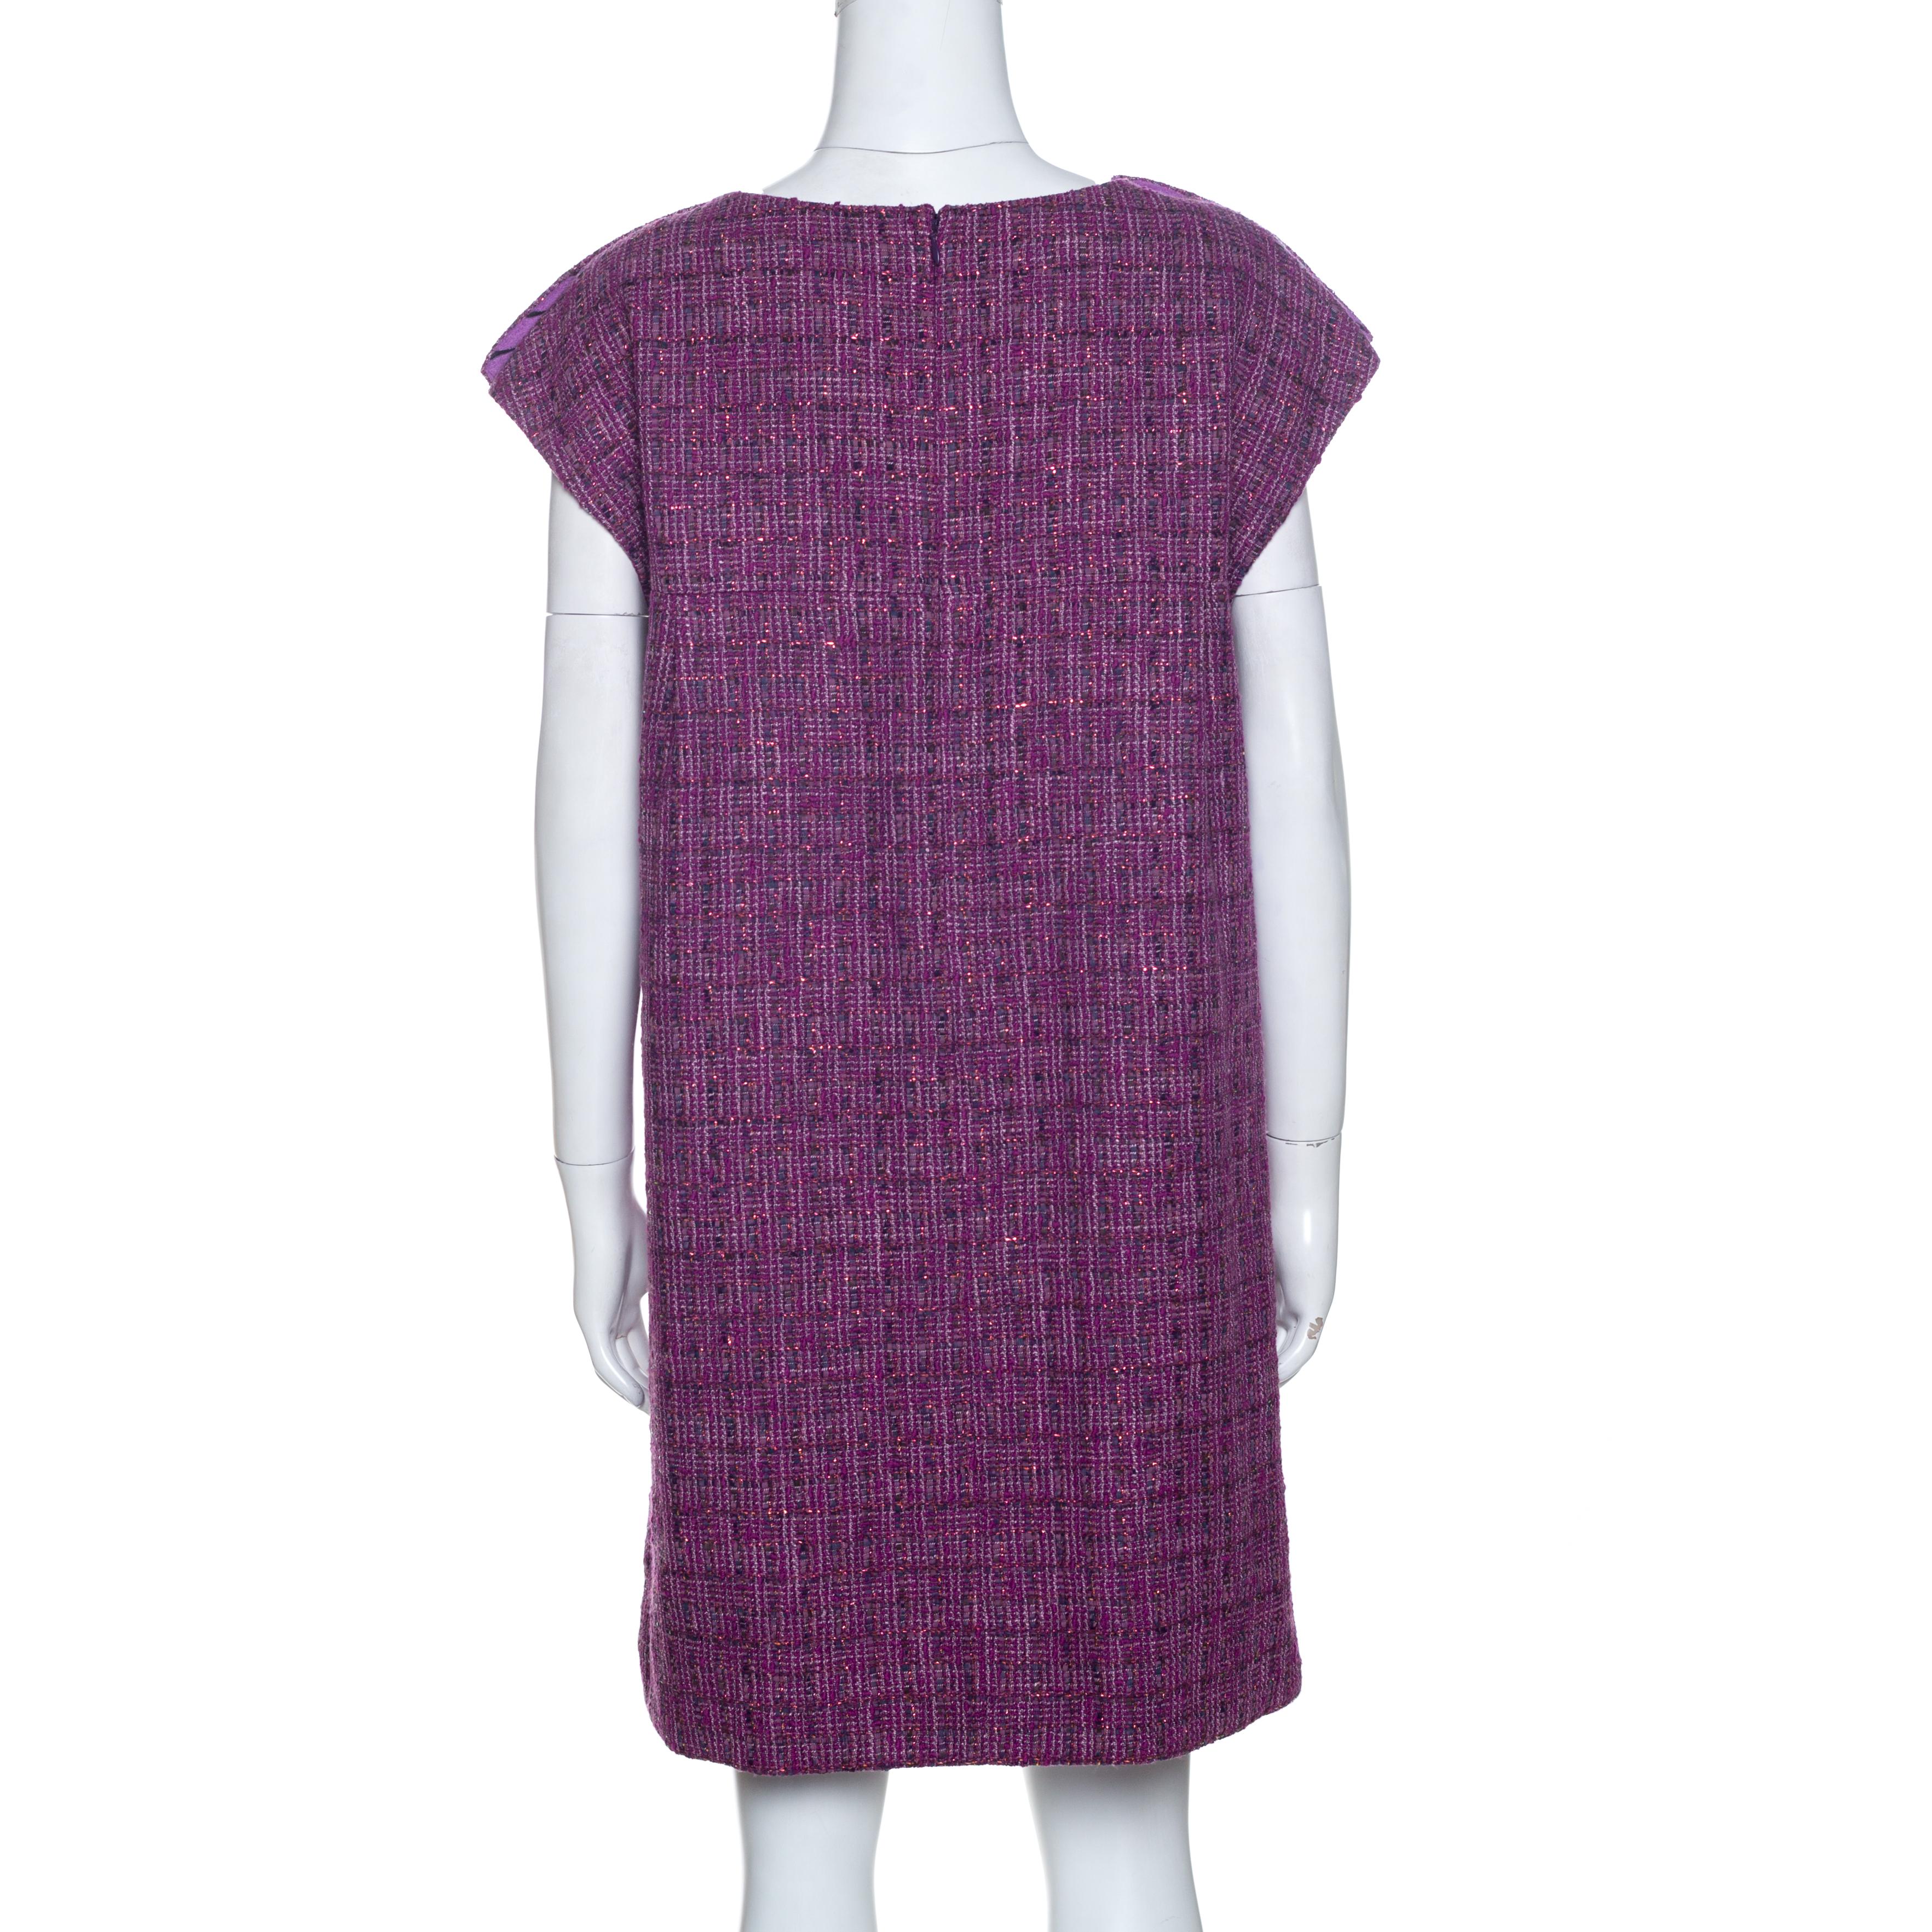 Chanel is known for its timeless designs and this tunic is no different. Crafted from quality materials, this metallic tweed dress comes in a lovely shade of purple. It is cut simply and styled with short sleeves, a round neck, pearl detailing at